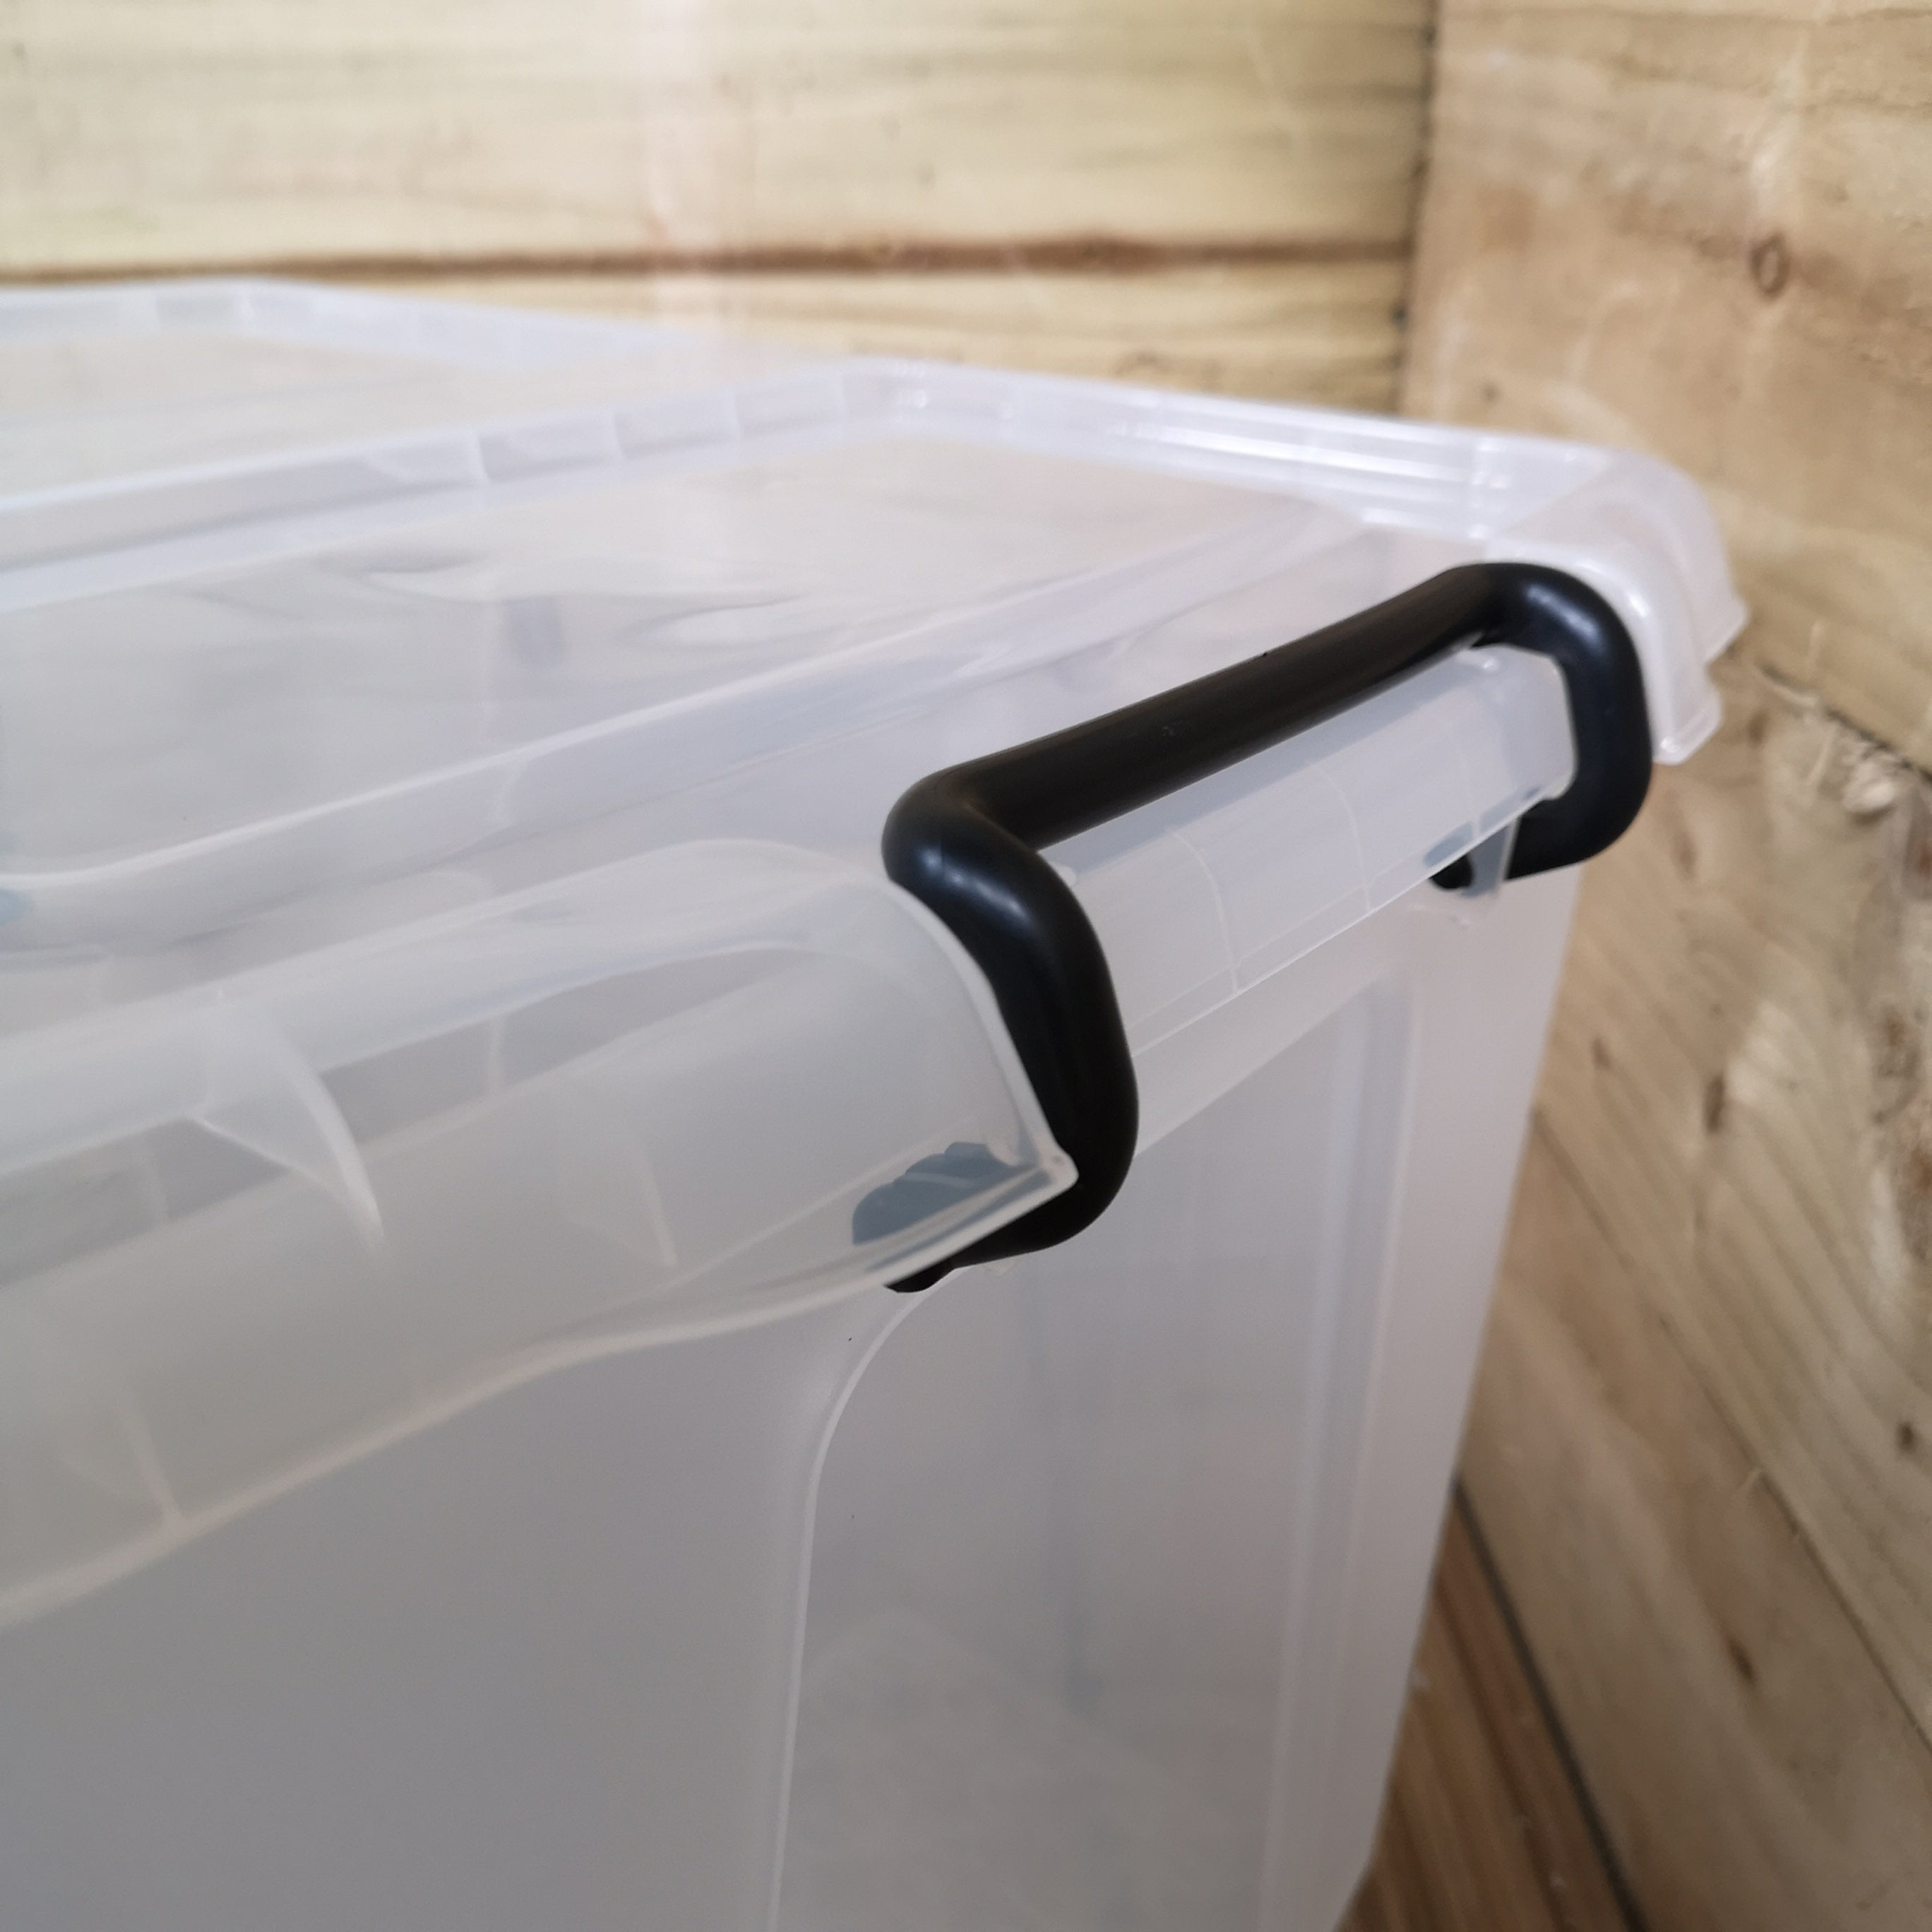 40L Smart Storage Box, Clear with Clear Extra Strong Lid, Stackable and Nestable Design Storage Solution